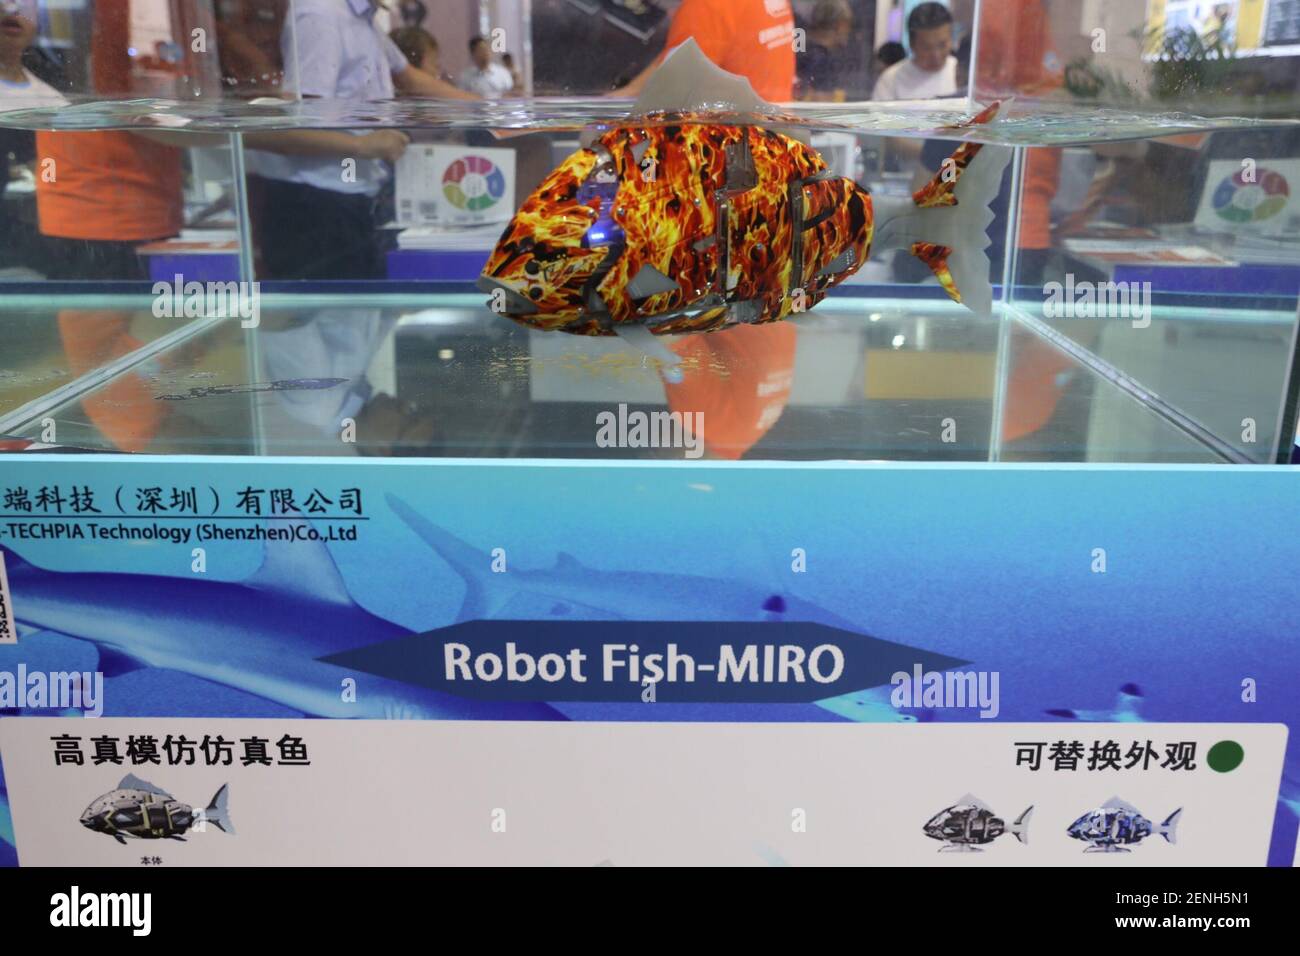 A robot Fish-Miro developed by Hi-Techpia Technology (Shenzhen) Co., Ltd.  is displayed during the 2019 Word Robot Conference (WRC) in Beijing, China,  20 August 2019. The 2019 Word Robot Conference (WRC) was